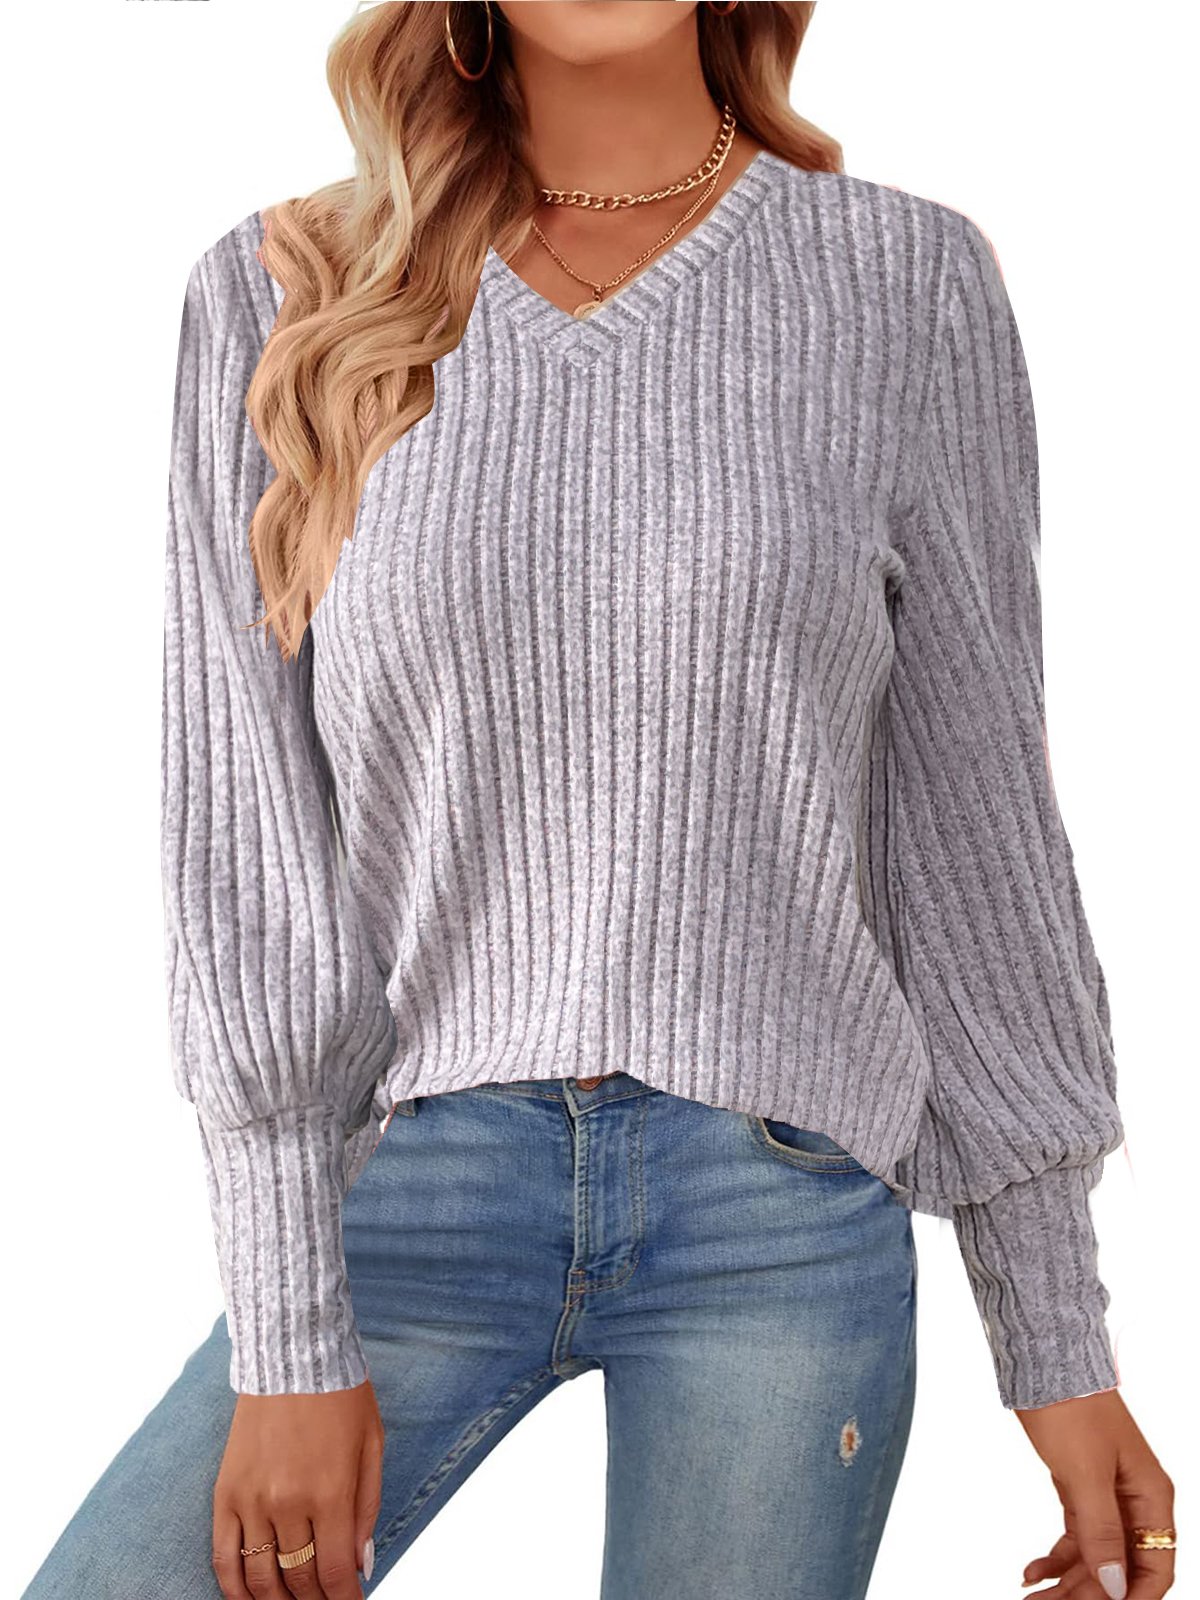 Women's Long Sleeve Shirt Spring/Fall Gray Purple Plain V Neck Daily Going Out Casual Top